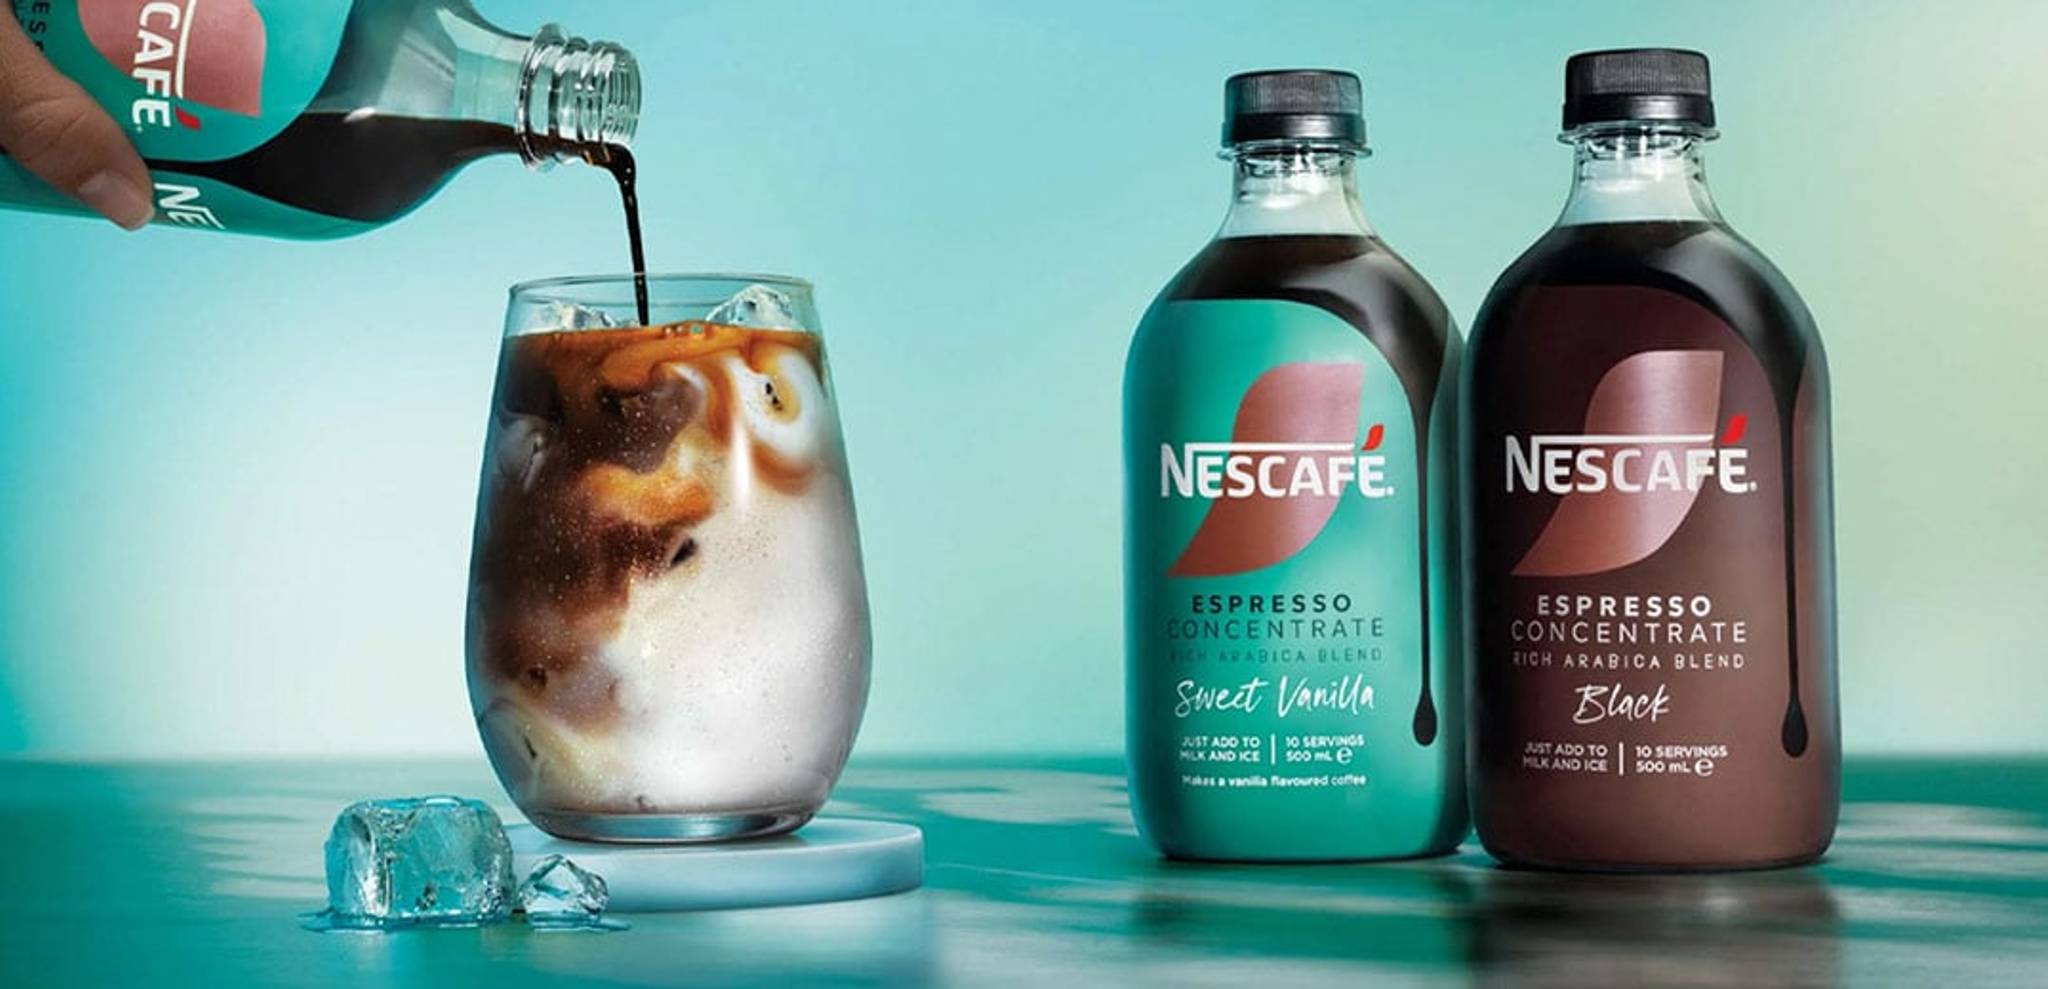 Nestlé launches espresso concentrates for cold drinks